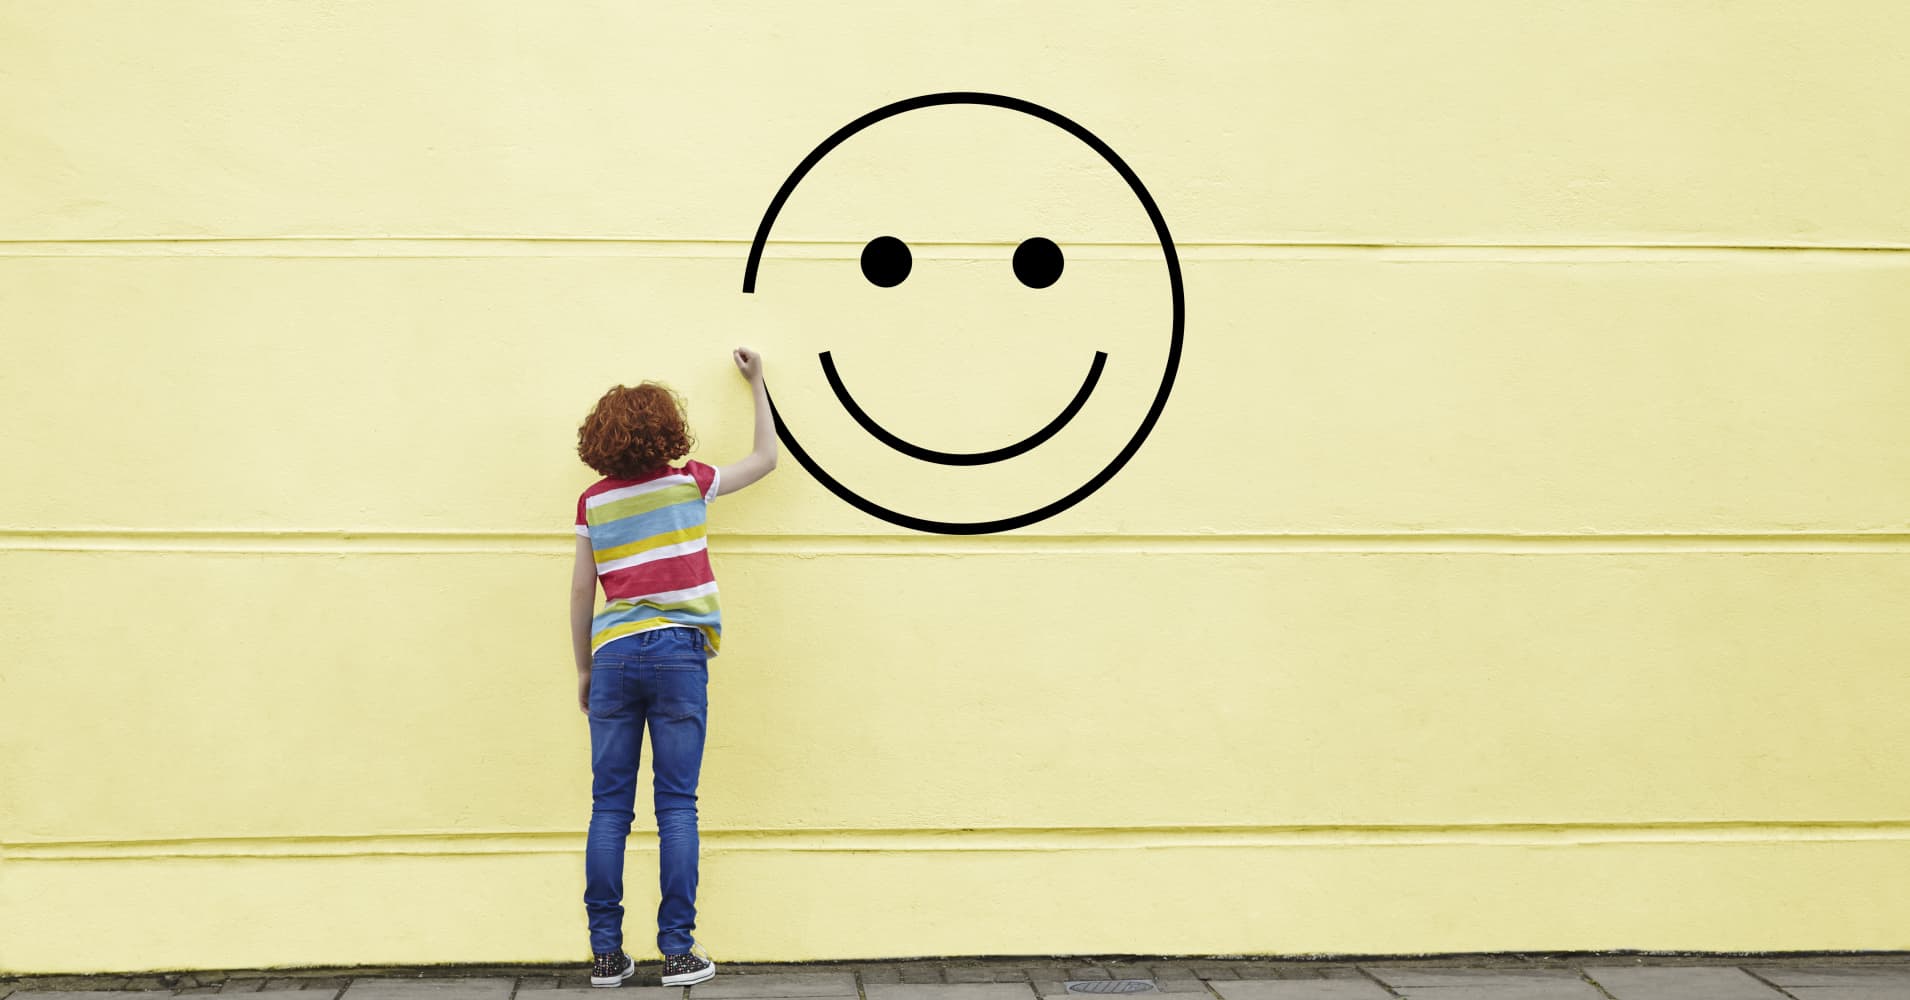 harvard professor who teaches a class on happiness: the happiest people balance and prioritize 3 things